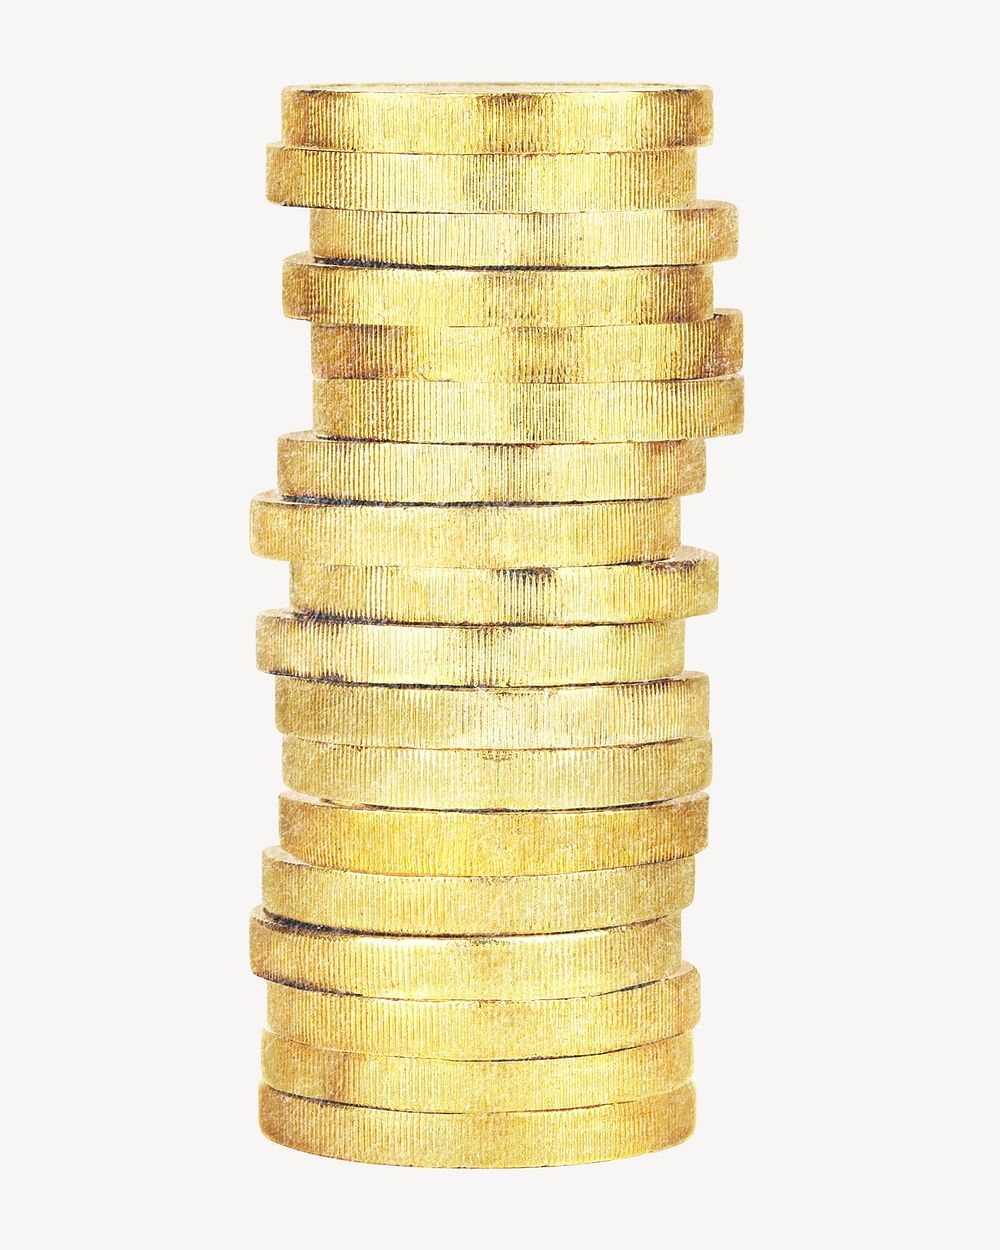 Stacked gold coins, money, finance isolated image psd